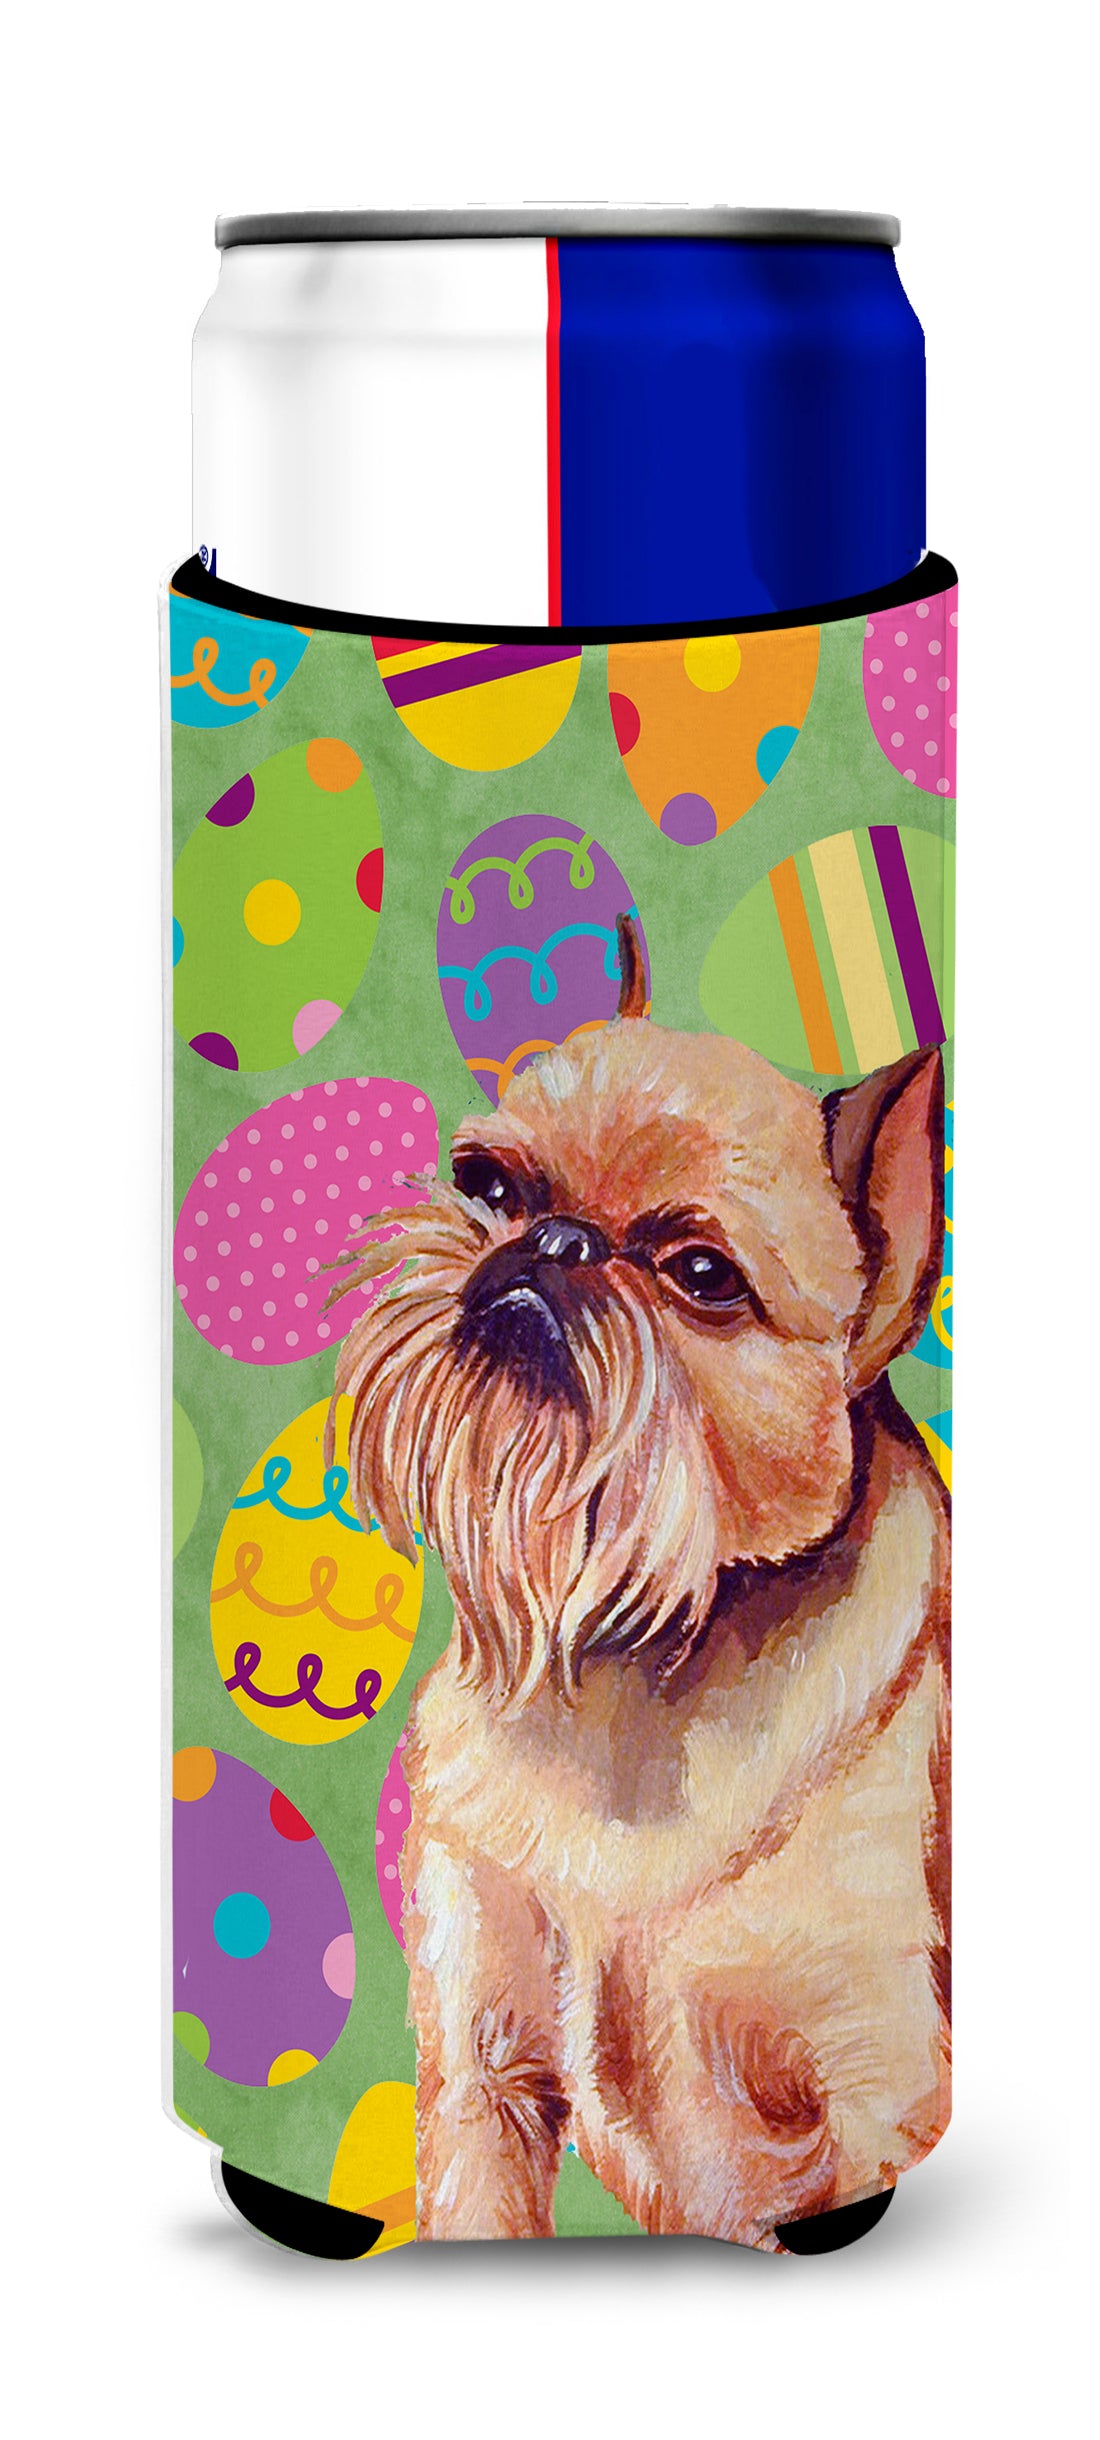 Brussels Griffon Easter Eggtravaganza Ultra Beverage Insulators for slim cans LH9404MUK.